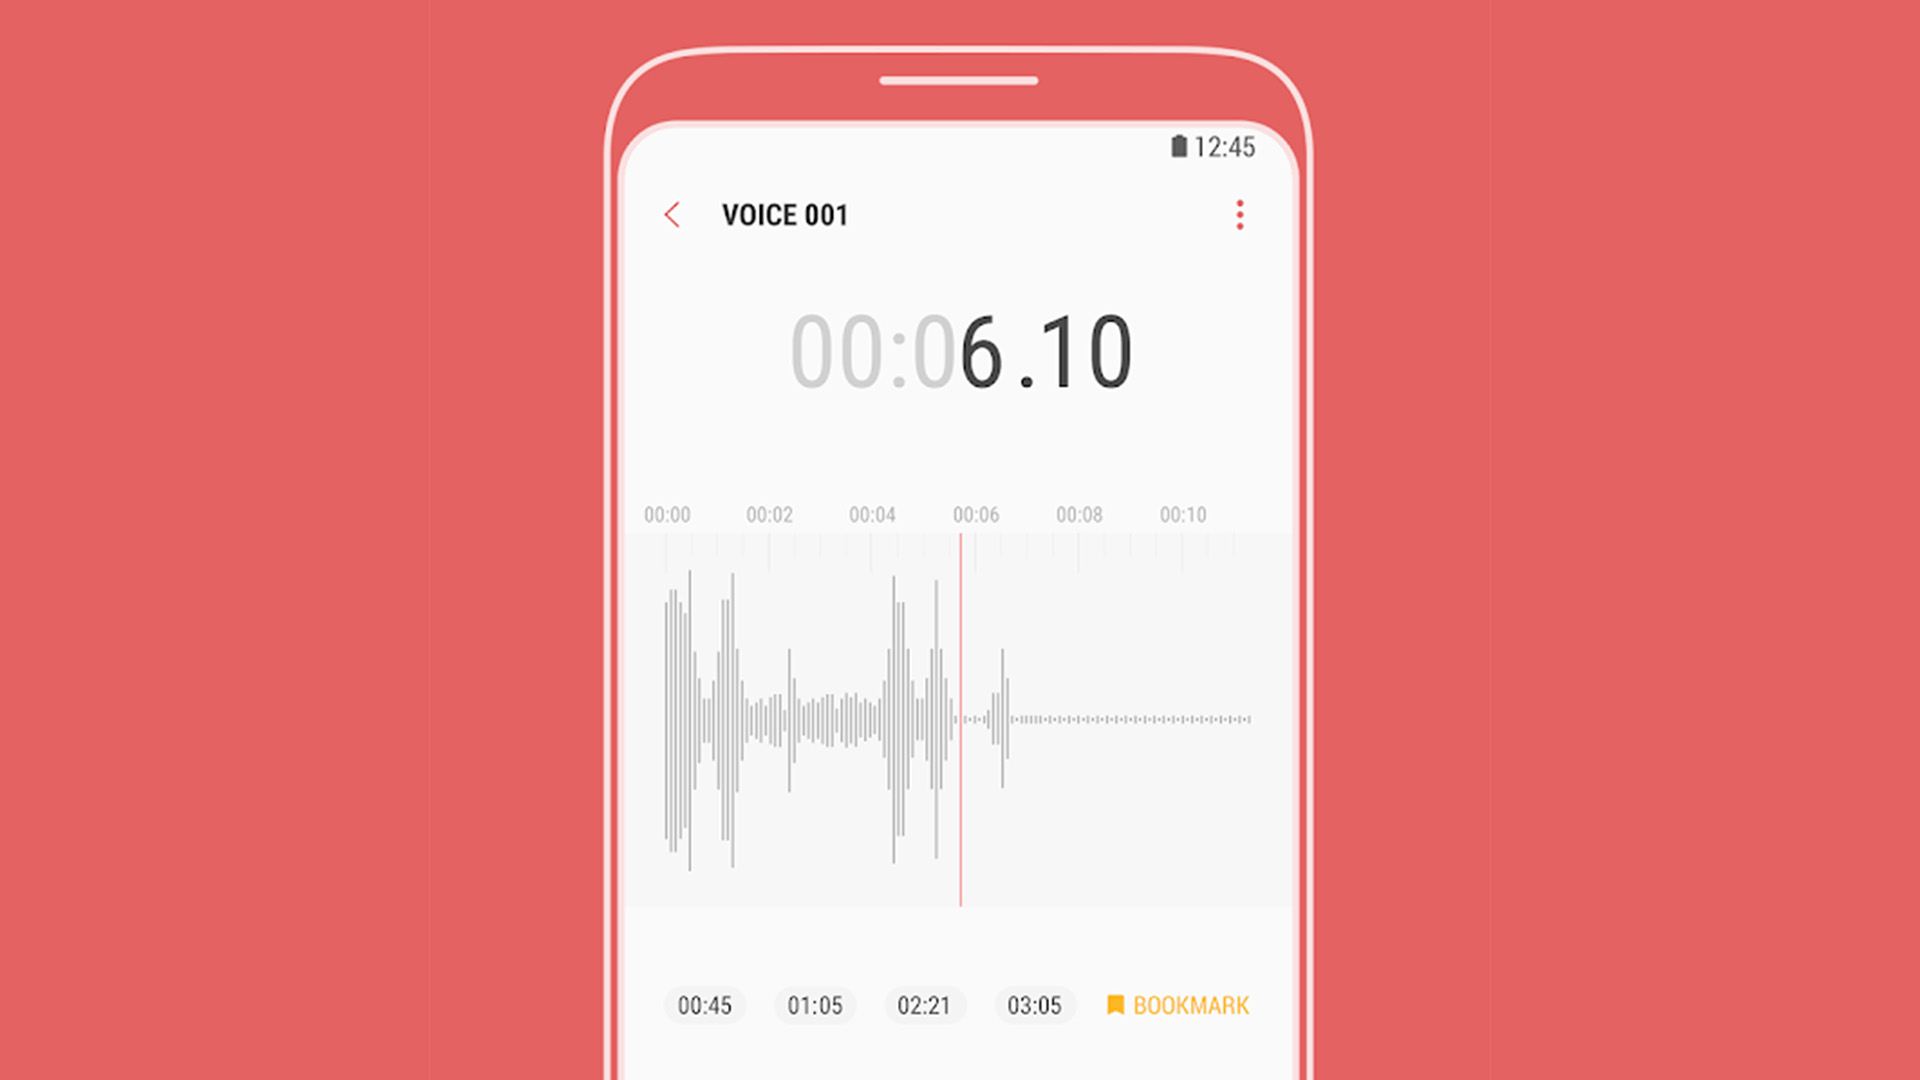 best lecture recorder app android